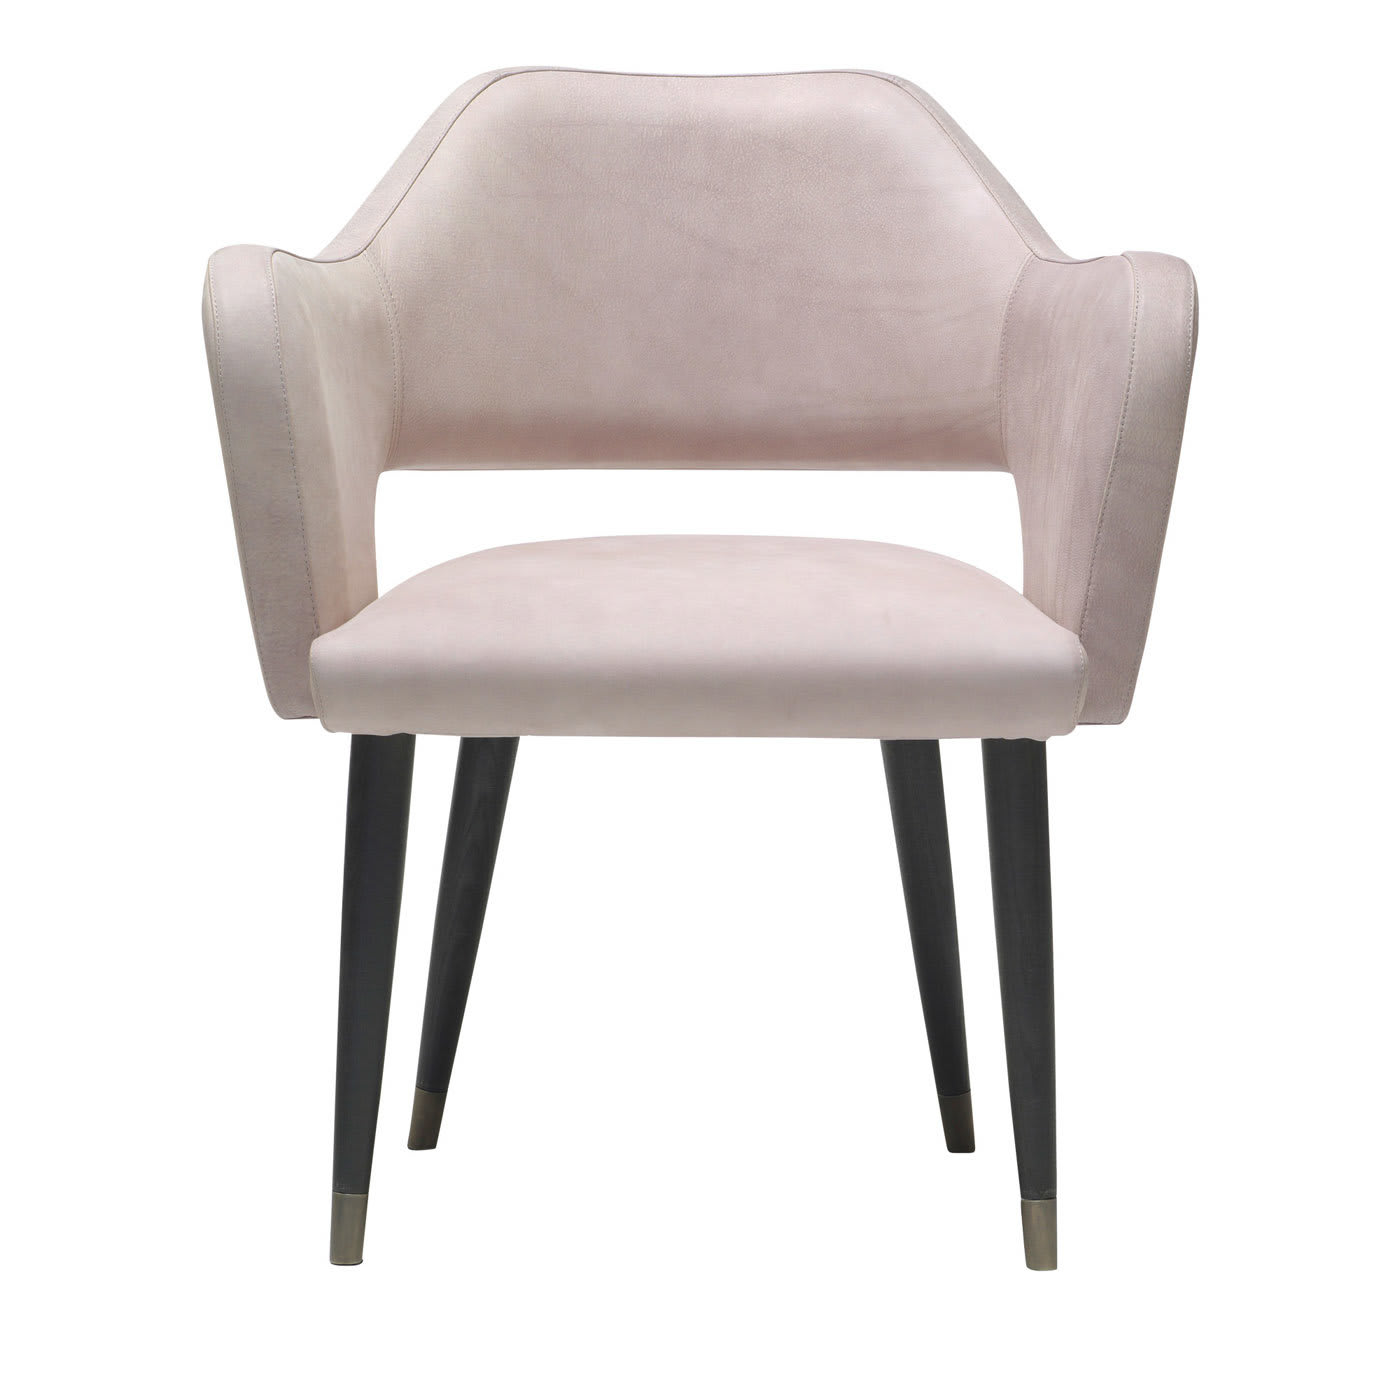 Ines Chair with Armrest - Ulivi Salotti